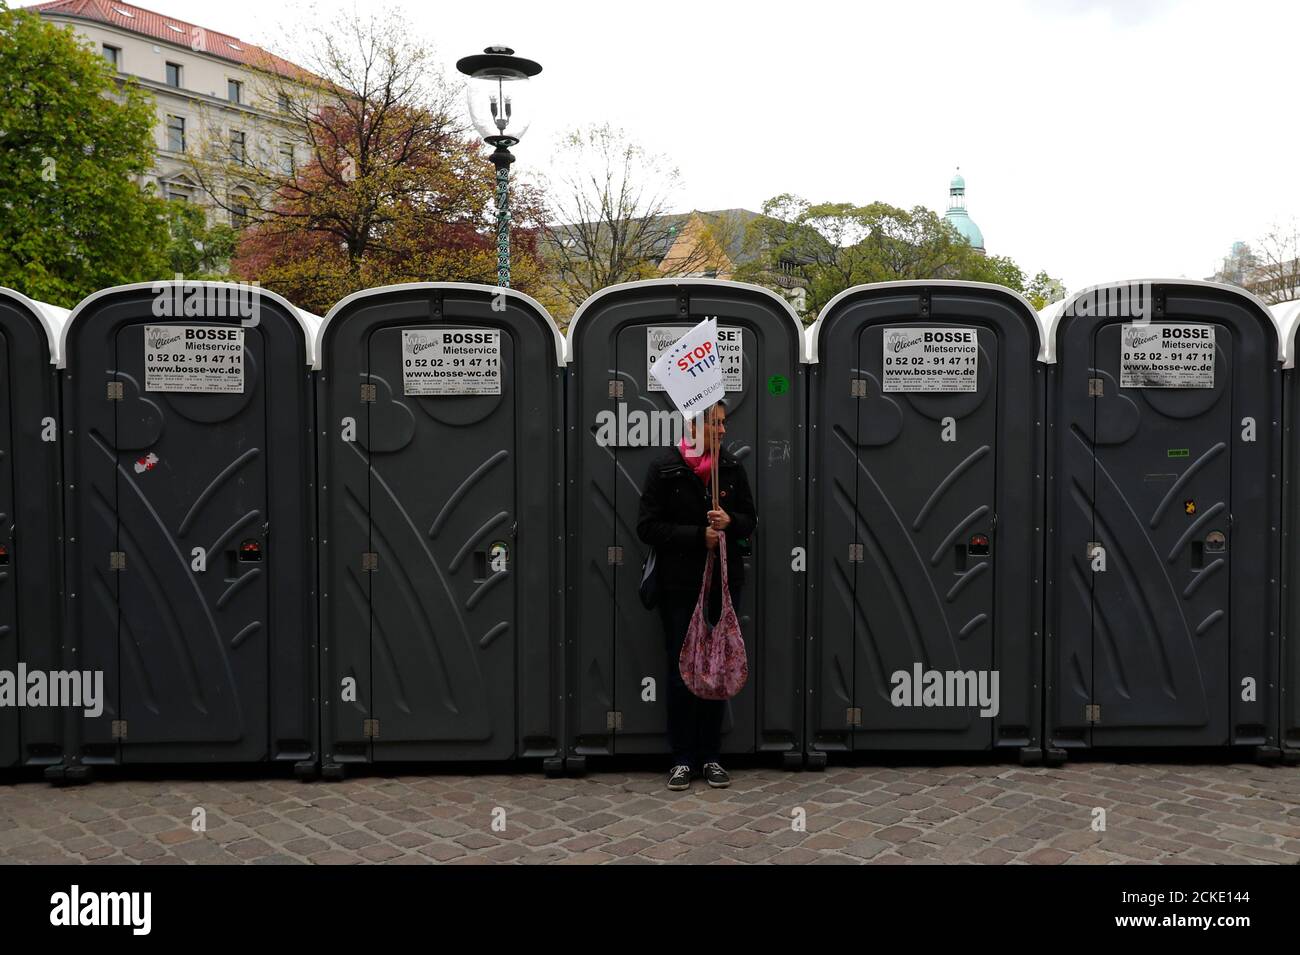 A protester holds placard as she stands in front of mobile toilets during a demonstration against Transatlantic Trade and Investment Partnership (TTIP) free trade agreement ahead of U.S. President Barack Obama's visit in Hannover, Germany April 23, 2016.  REUTERS/Kai Pfaffenbach Stock Photo